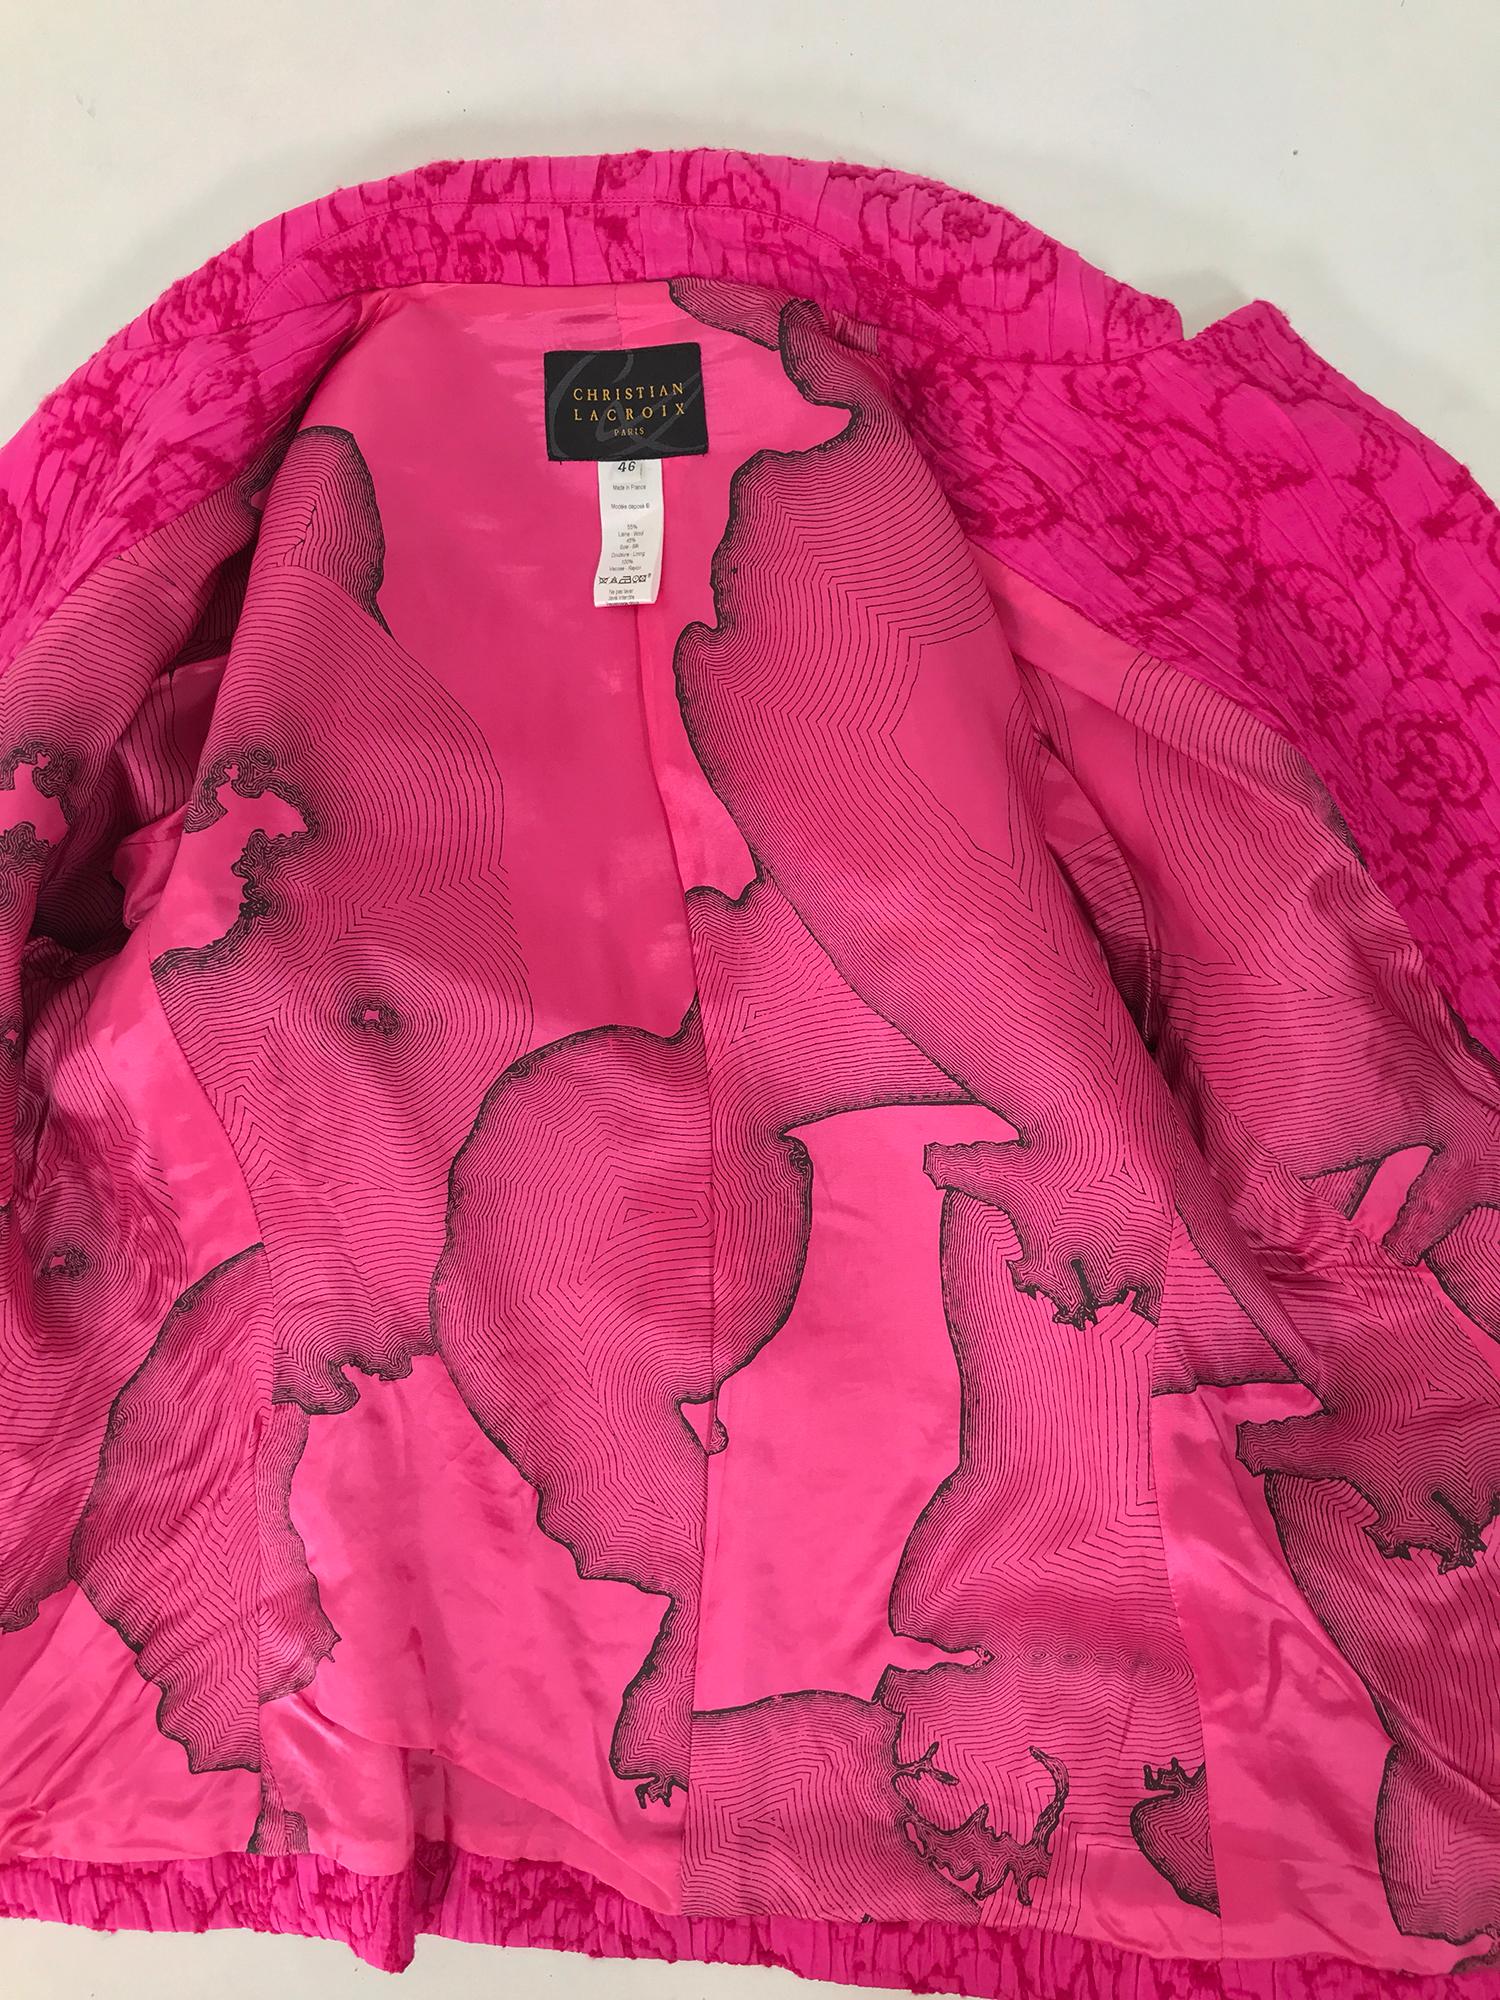 Christian Lacroix Pink Embroidered Silk Applique Skirt Suit 1990s For Sale 8